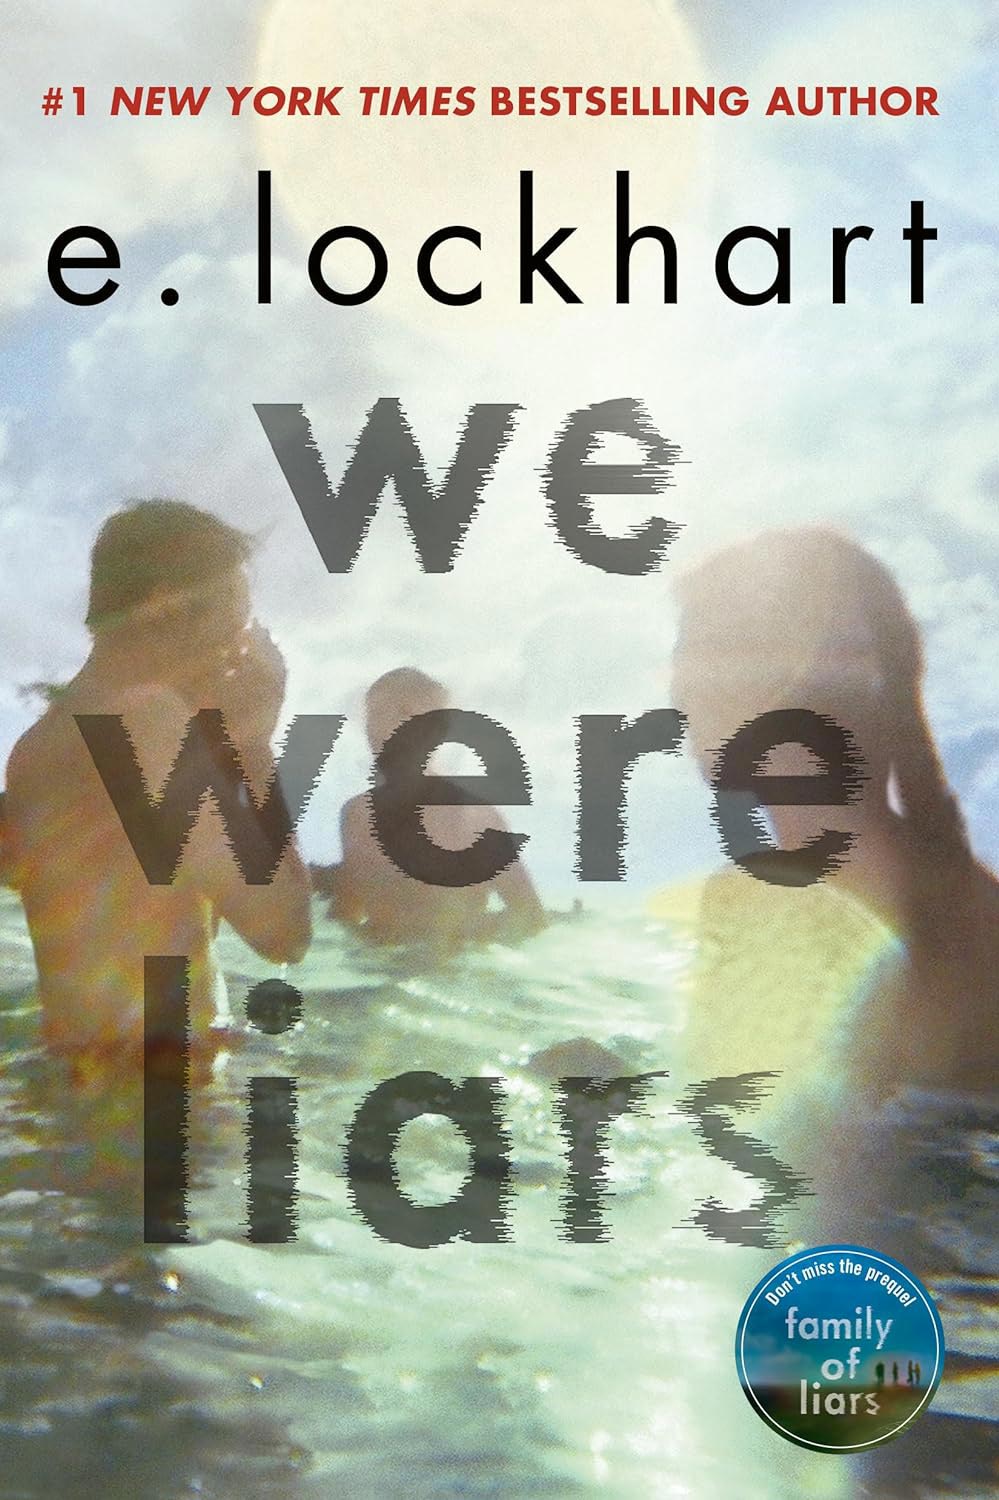 Everything to Know About Prime Video's 'We Were Liars' Series: From Cast Details to Book Connections